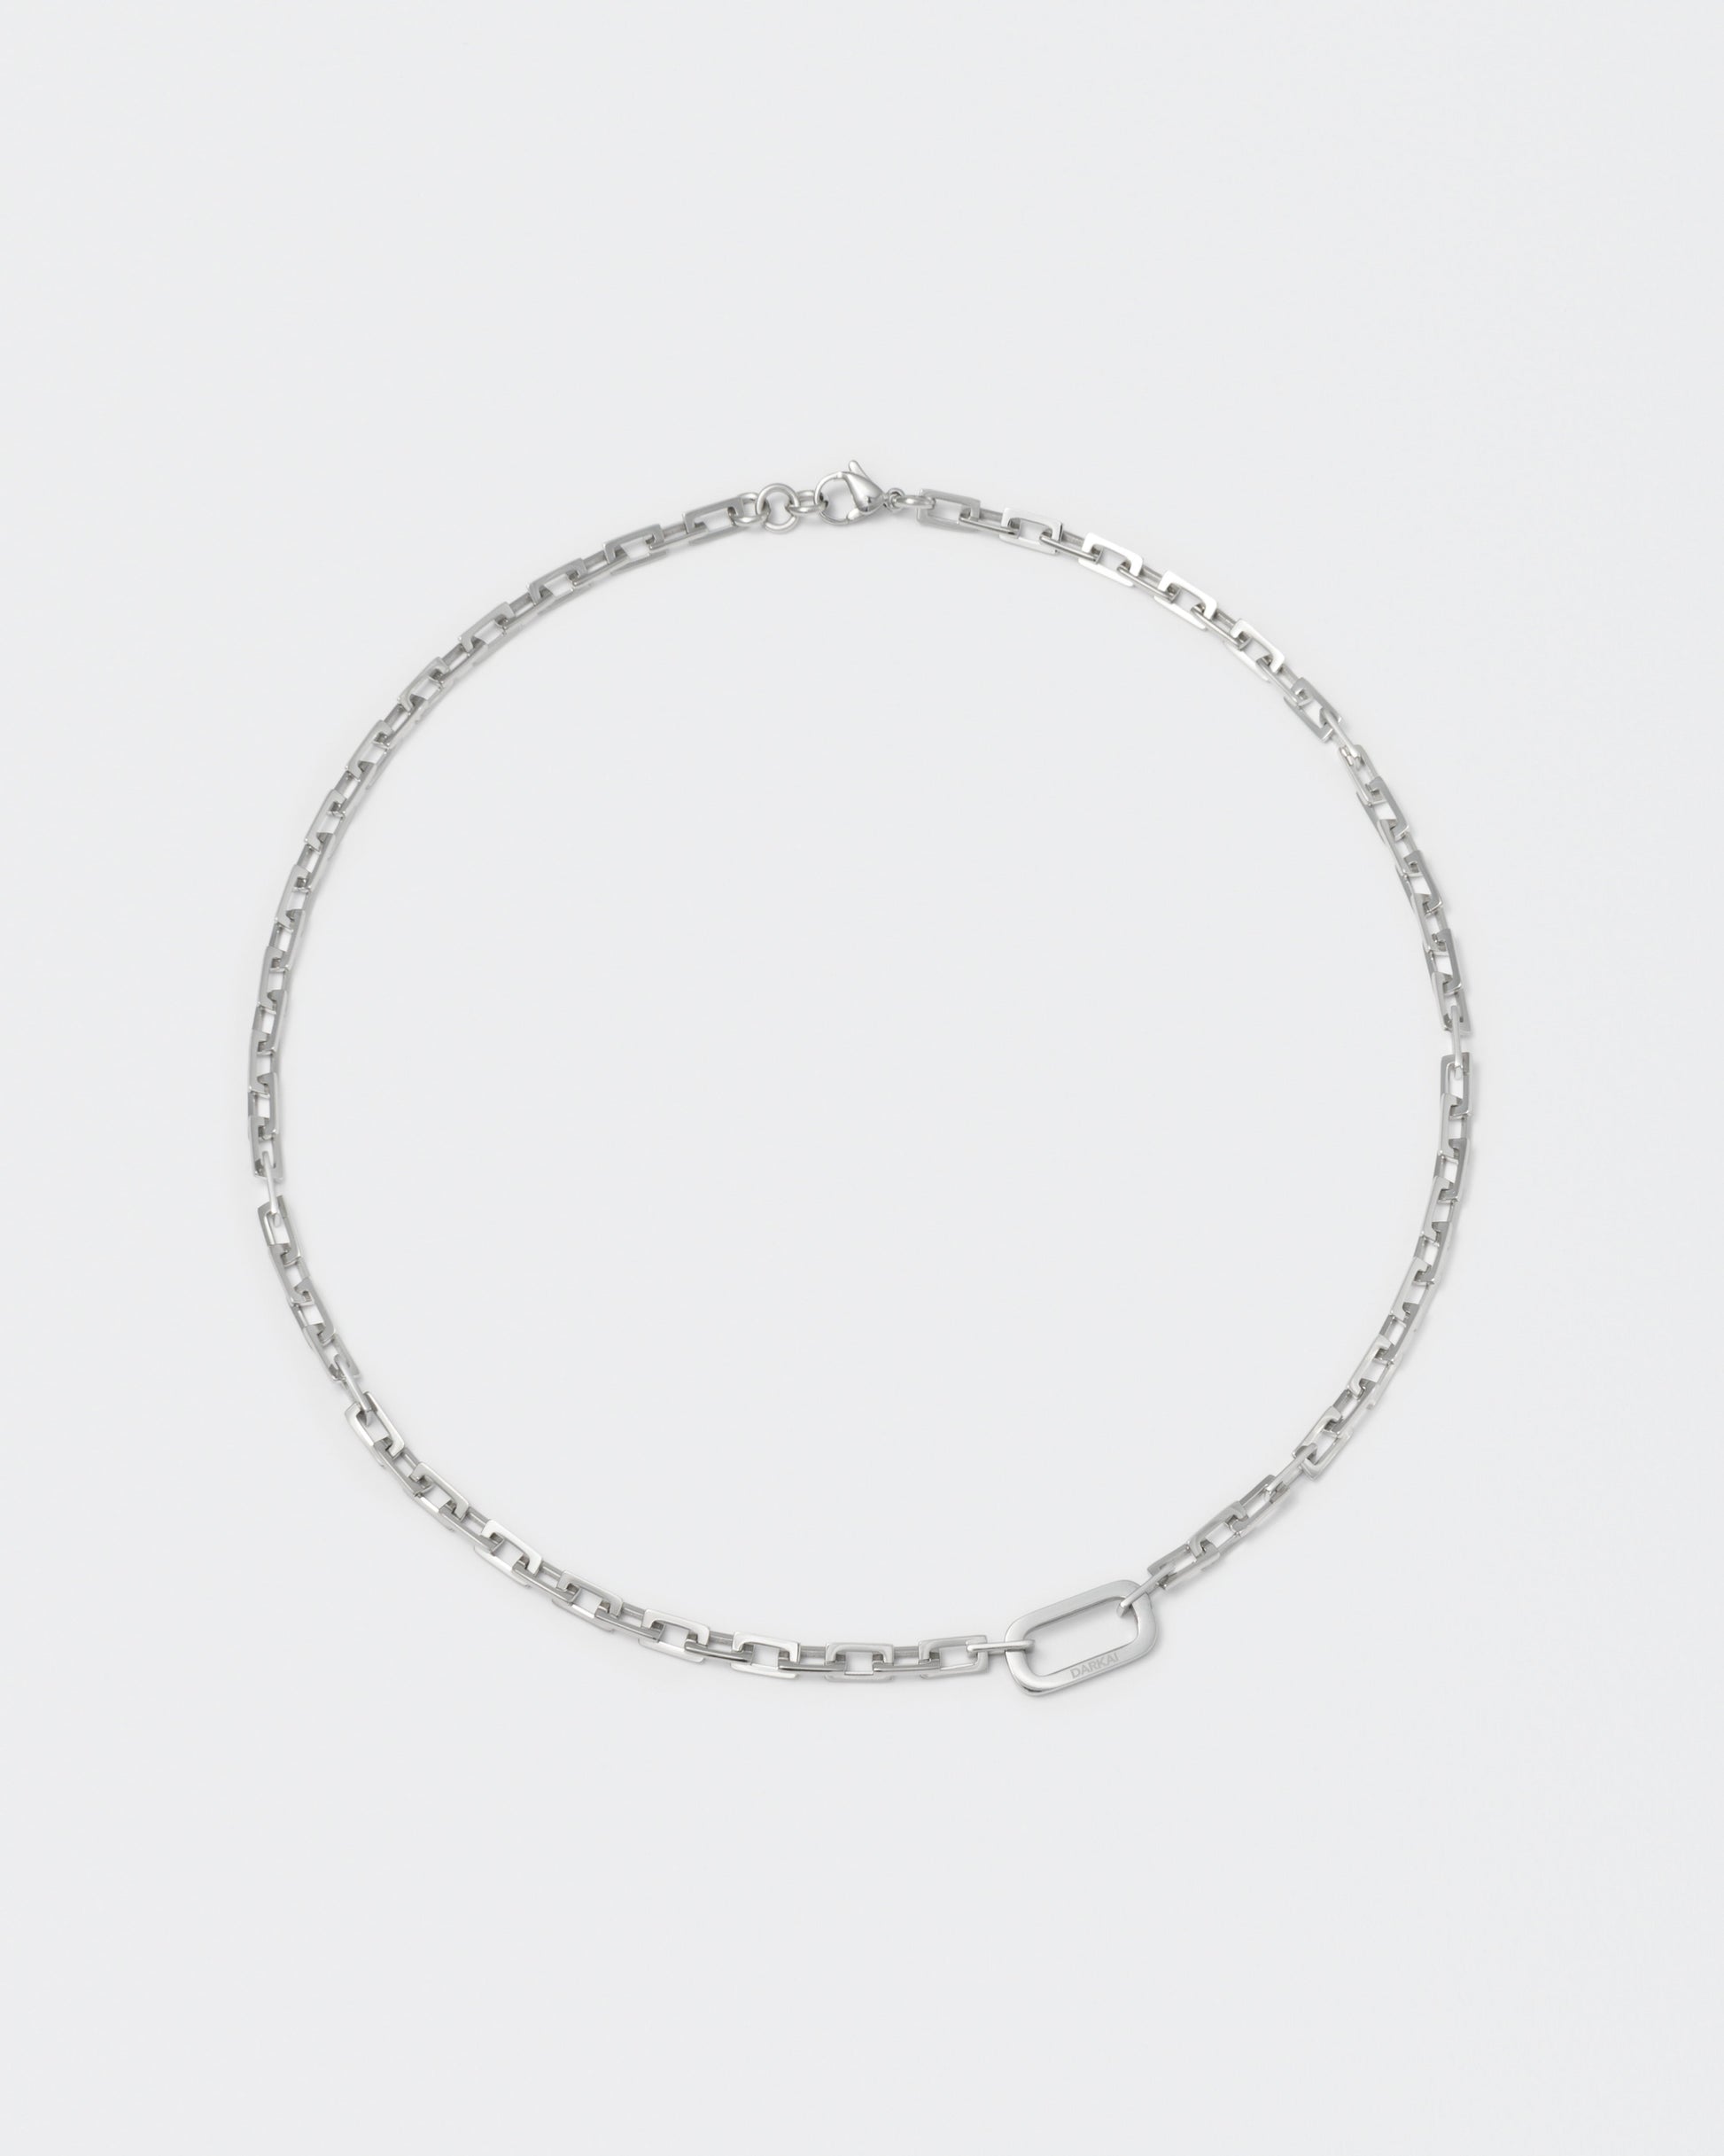 18k white gold coated edgy diamond finished rolo chain necklace with central oval link detail and lobster clasp with logo